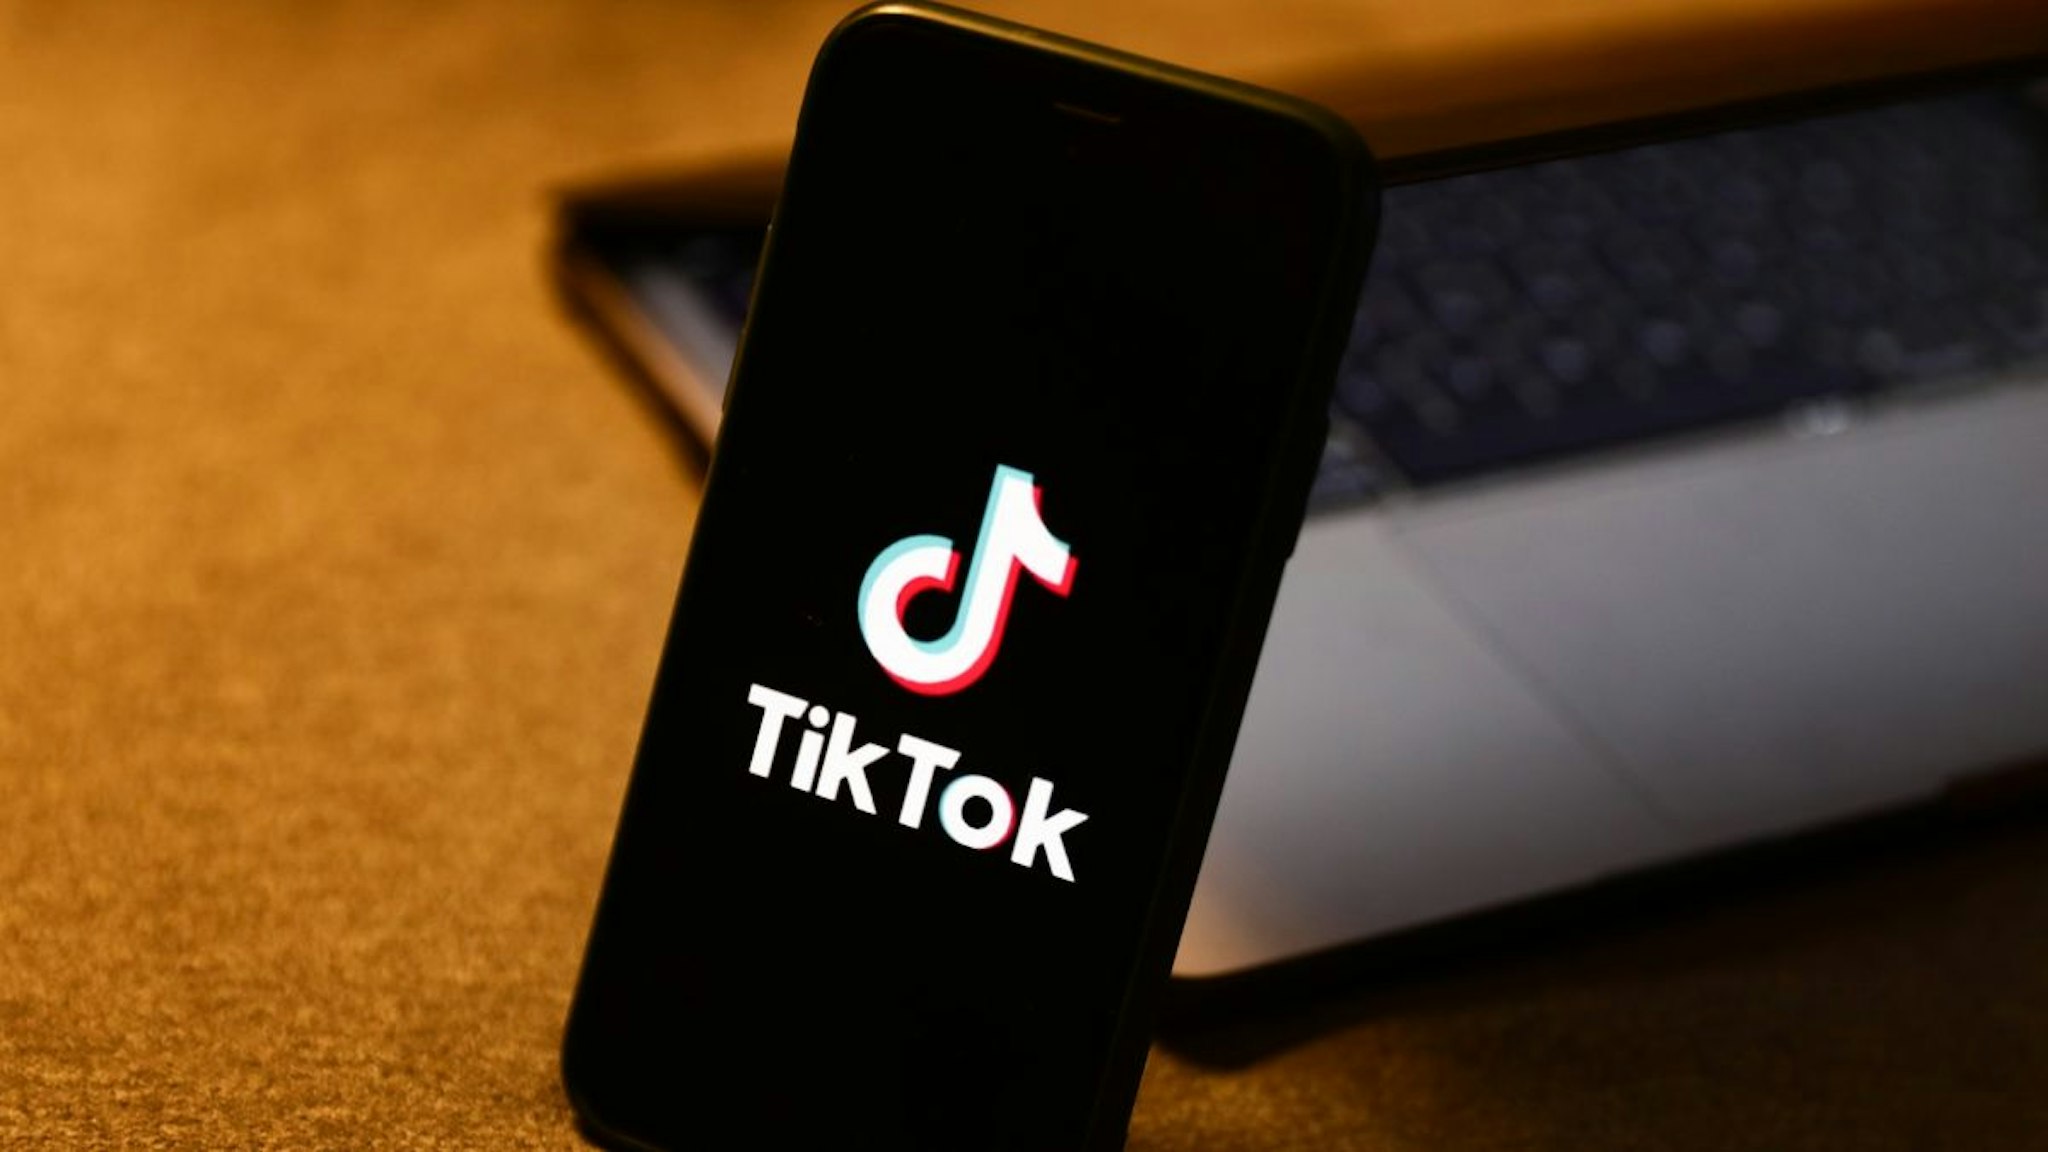 TikTok logo displayed on a phone screen and a laptop are seen in this illustration photo taken in Krakow, Poland on August 10, 2022.